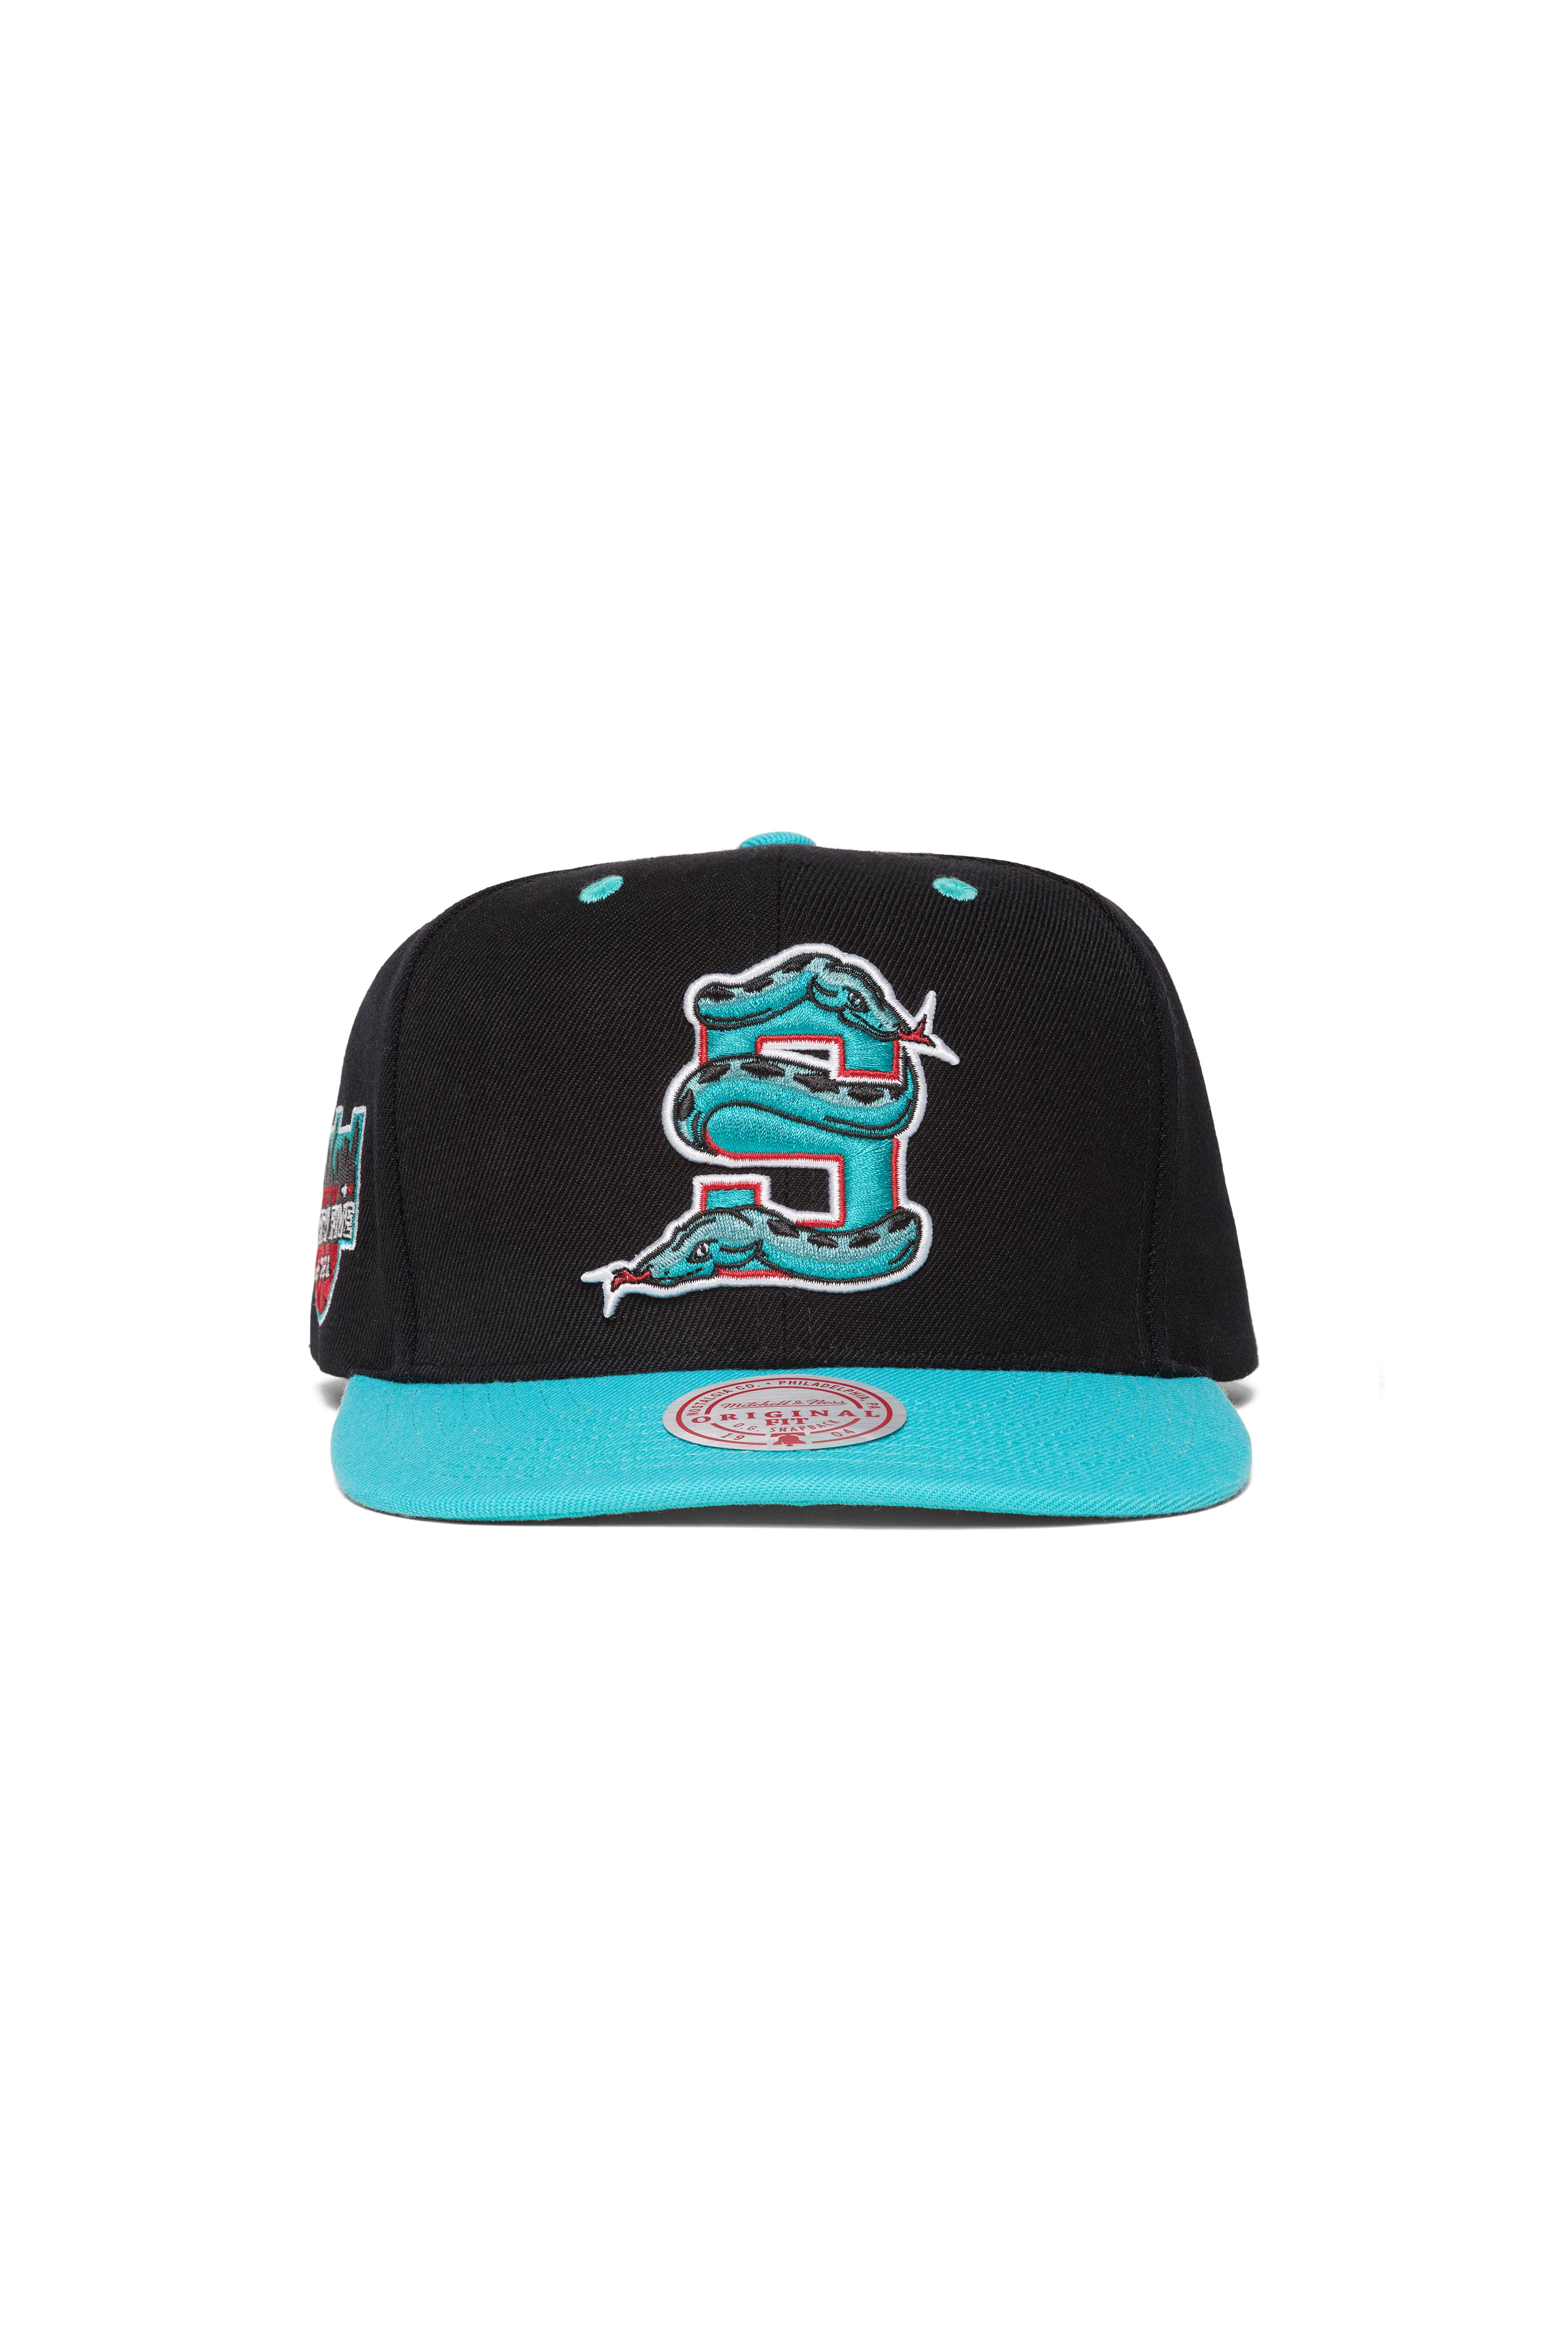 Mitchell & Ness Vancouver Grizzlies Snapback Hat